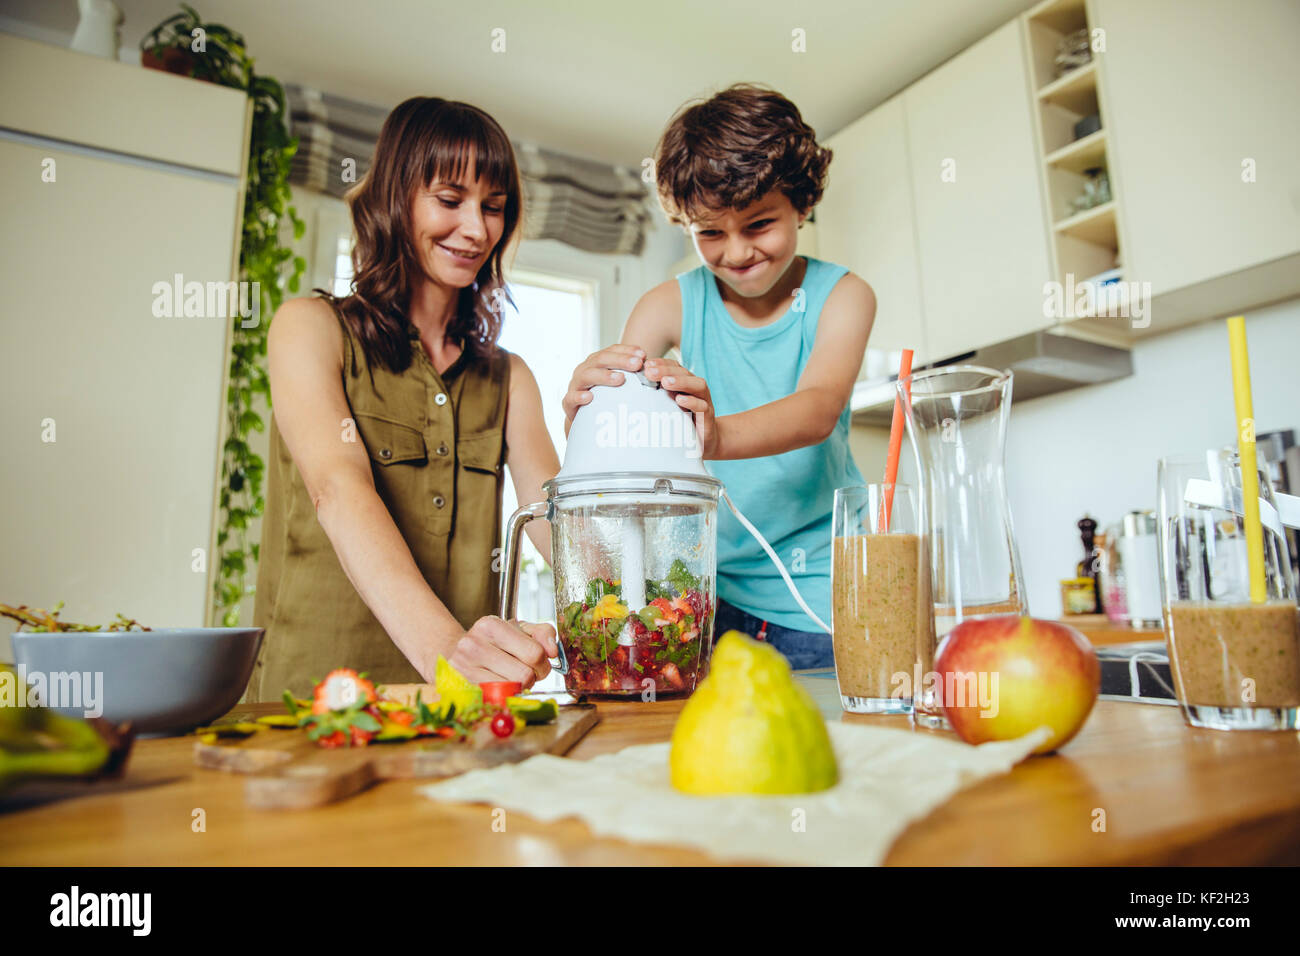 Son blending smoothie with mother Stock Photo